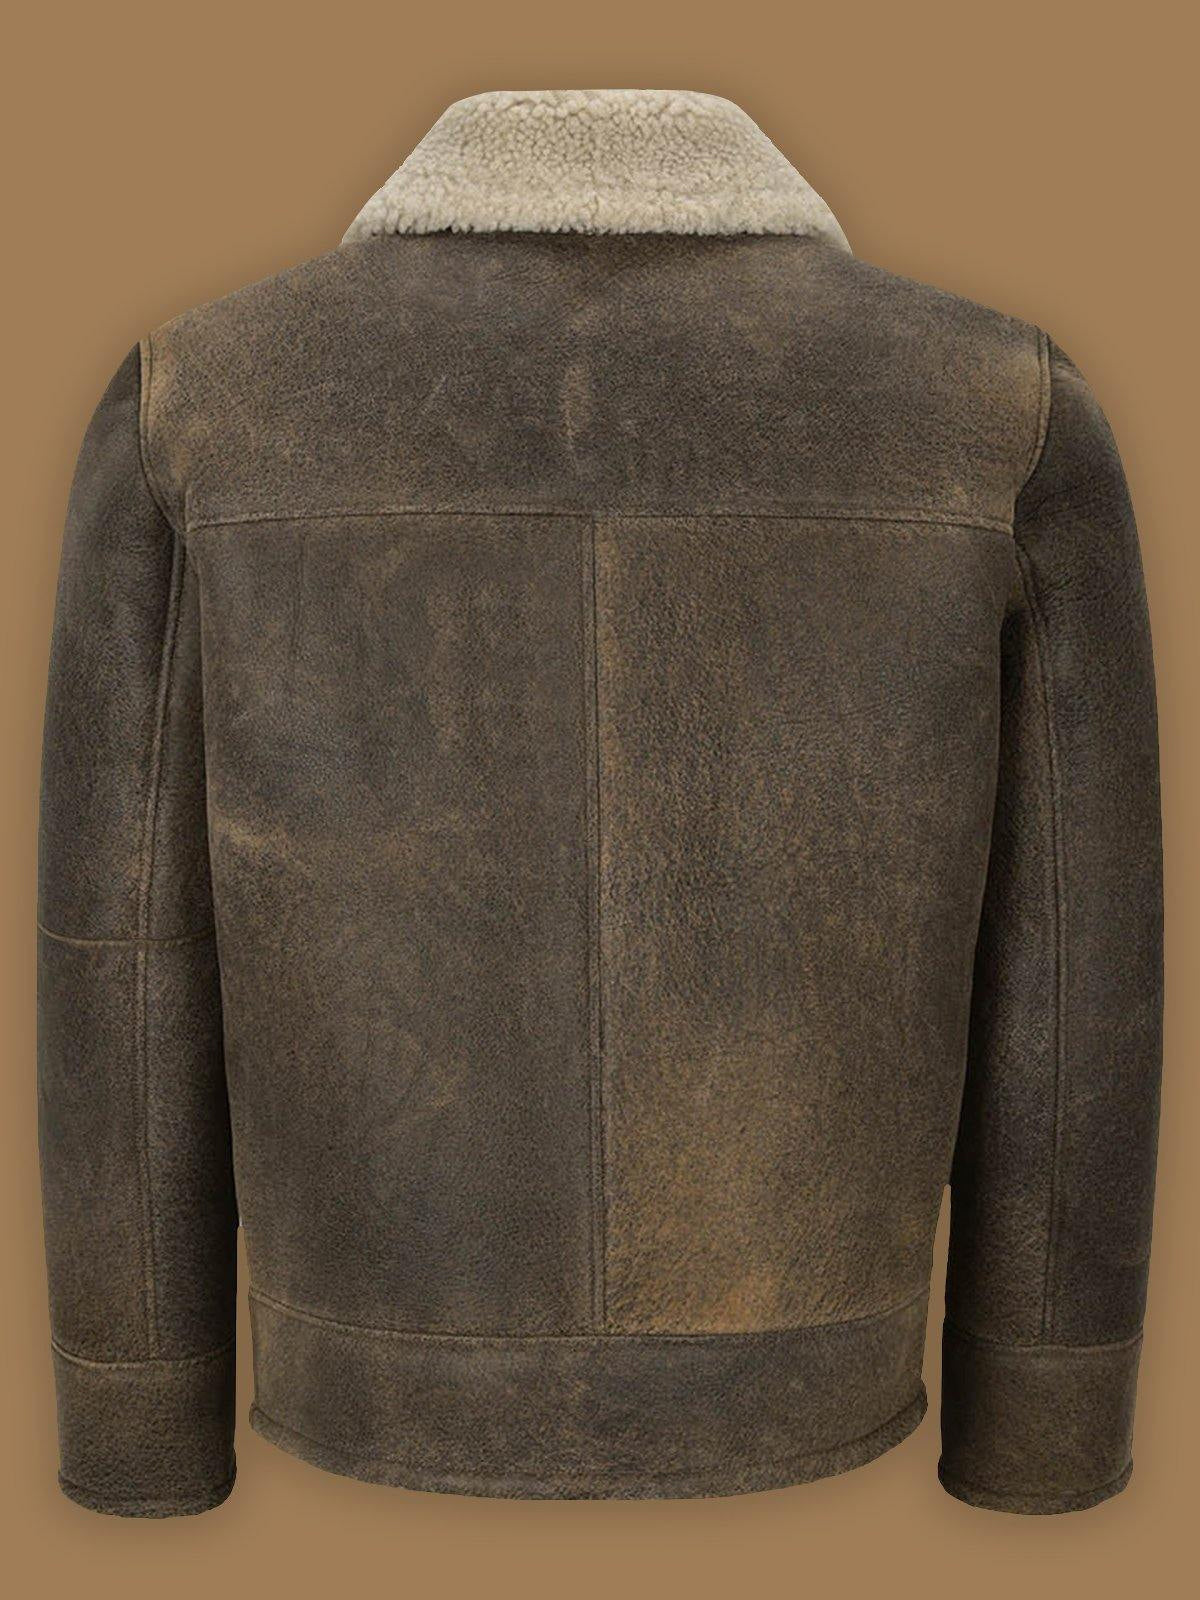 Men Old Fashion Brown Shearling Bomber Leather Jacket - Theleathercomfort